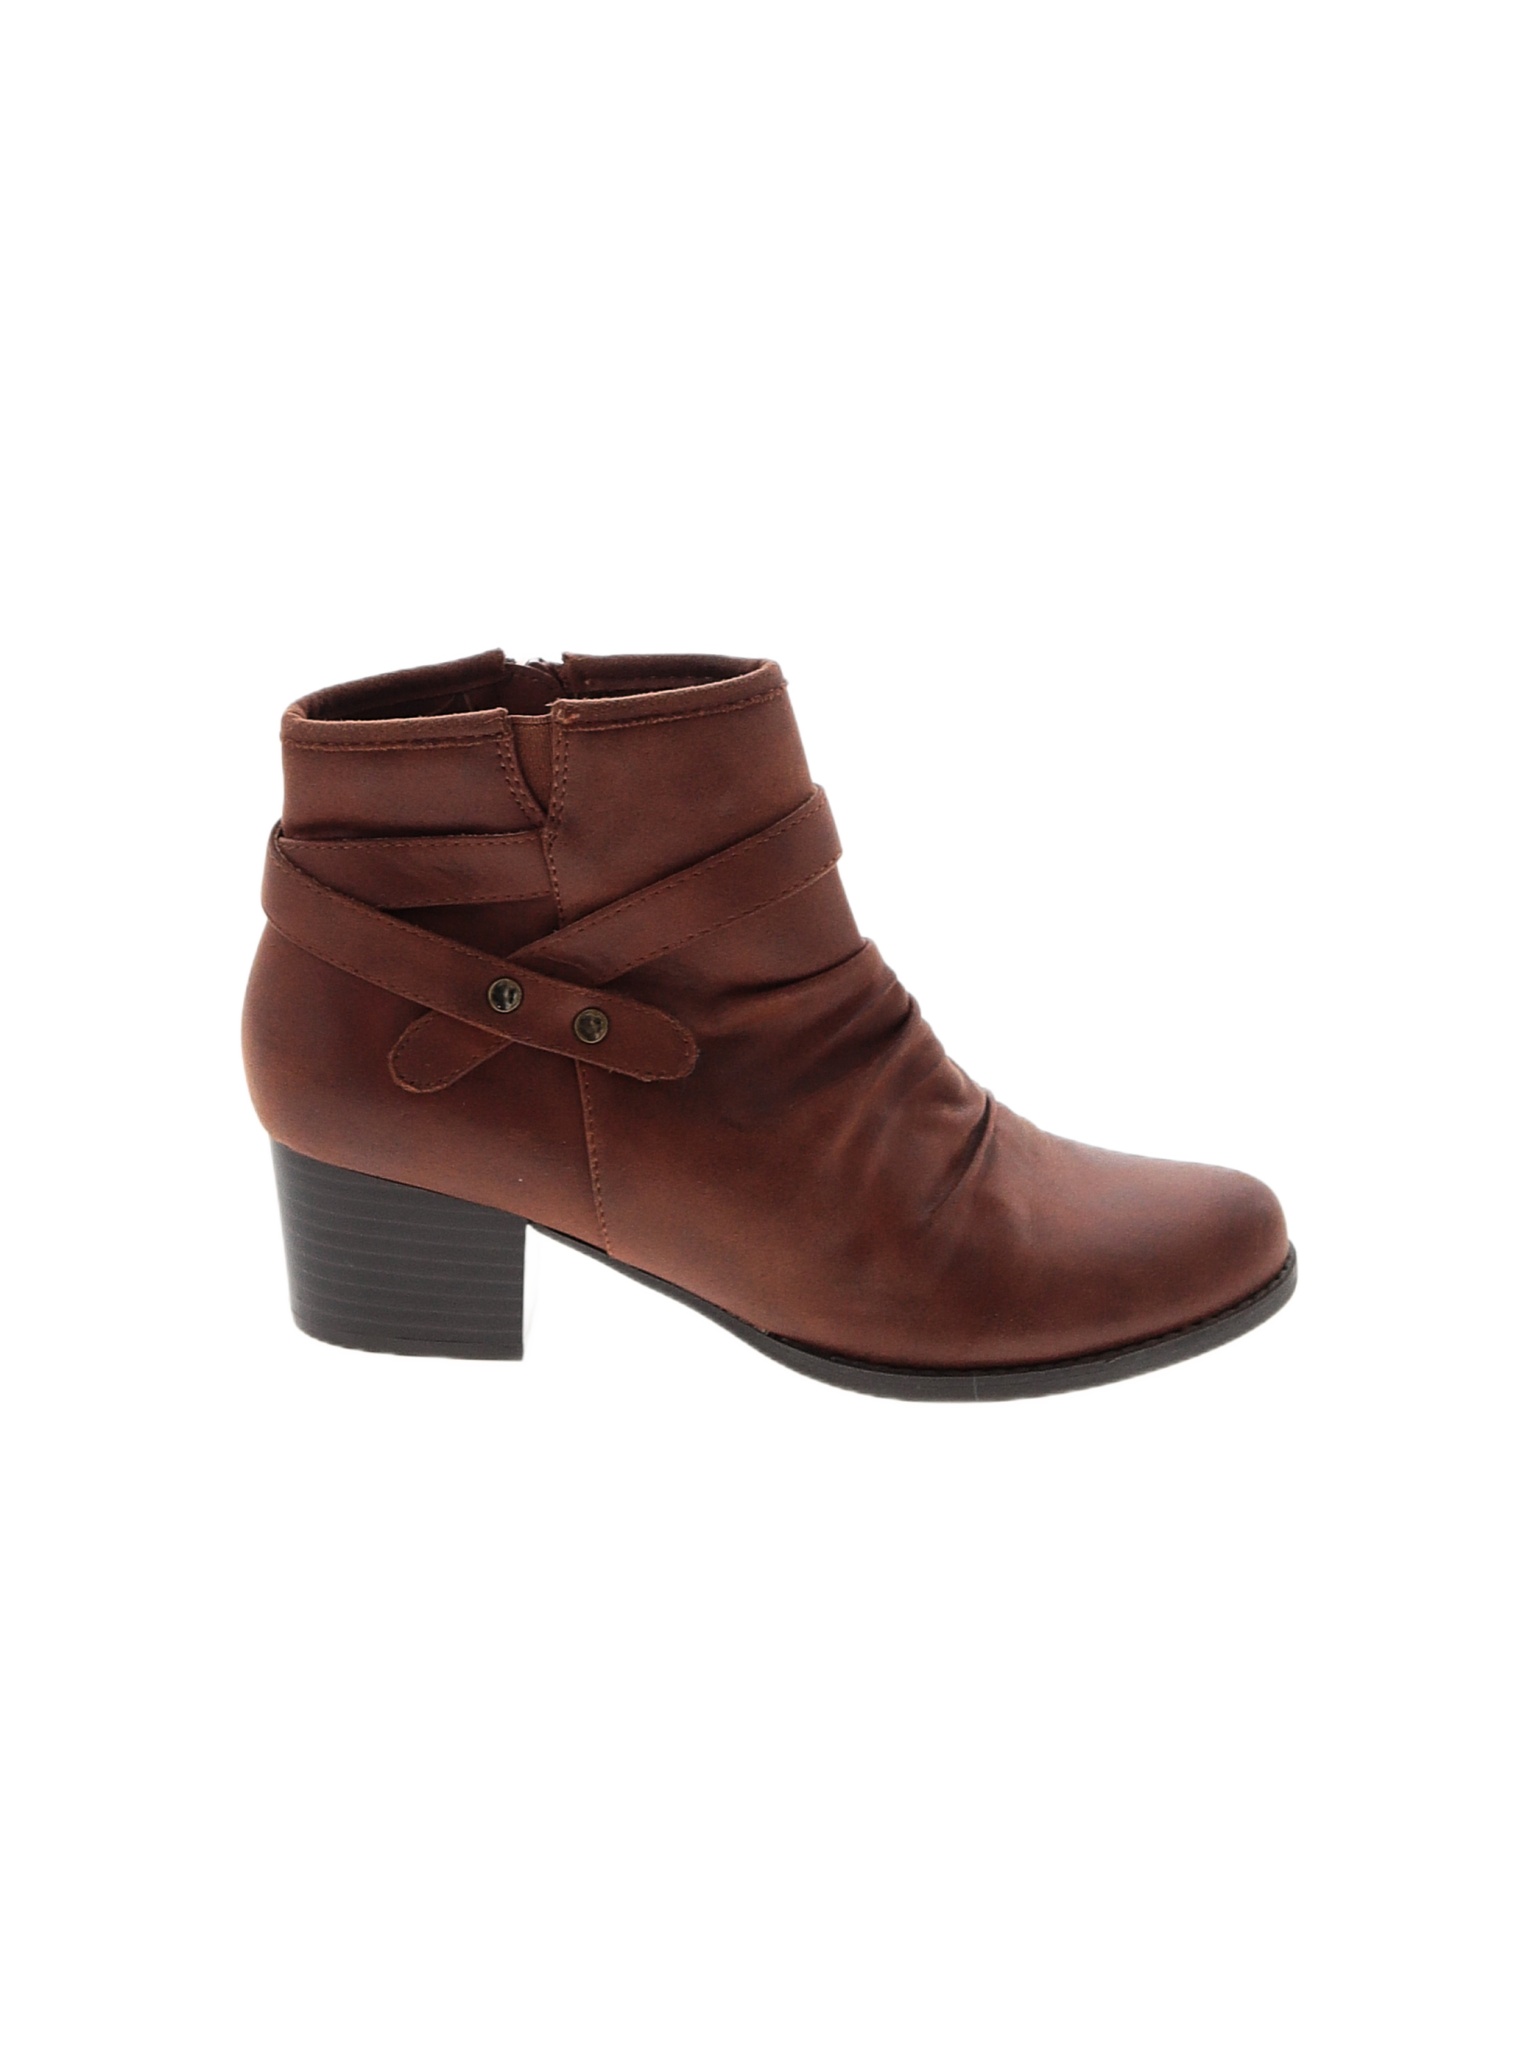 Wearever Women's Shoes On Sale Up To 90% Off Retail | thredUP